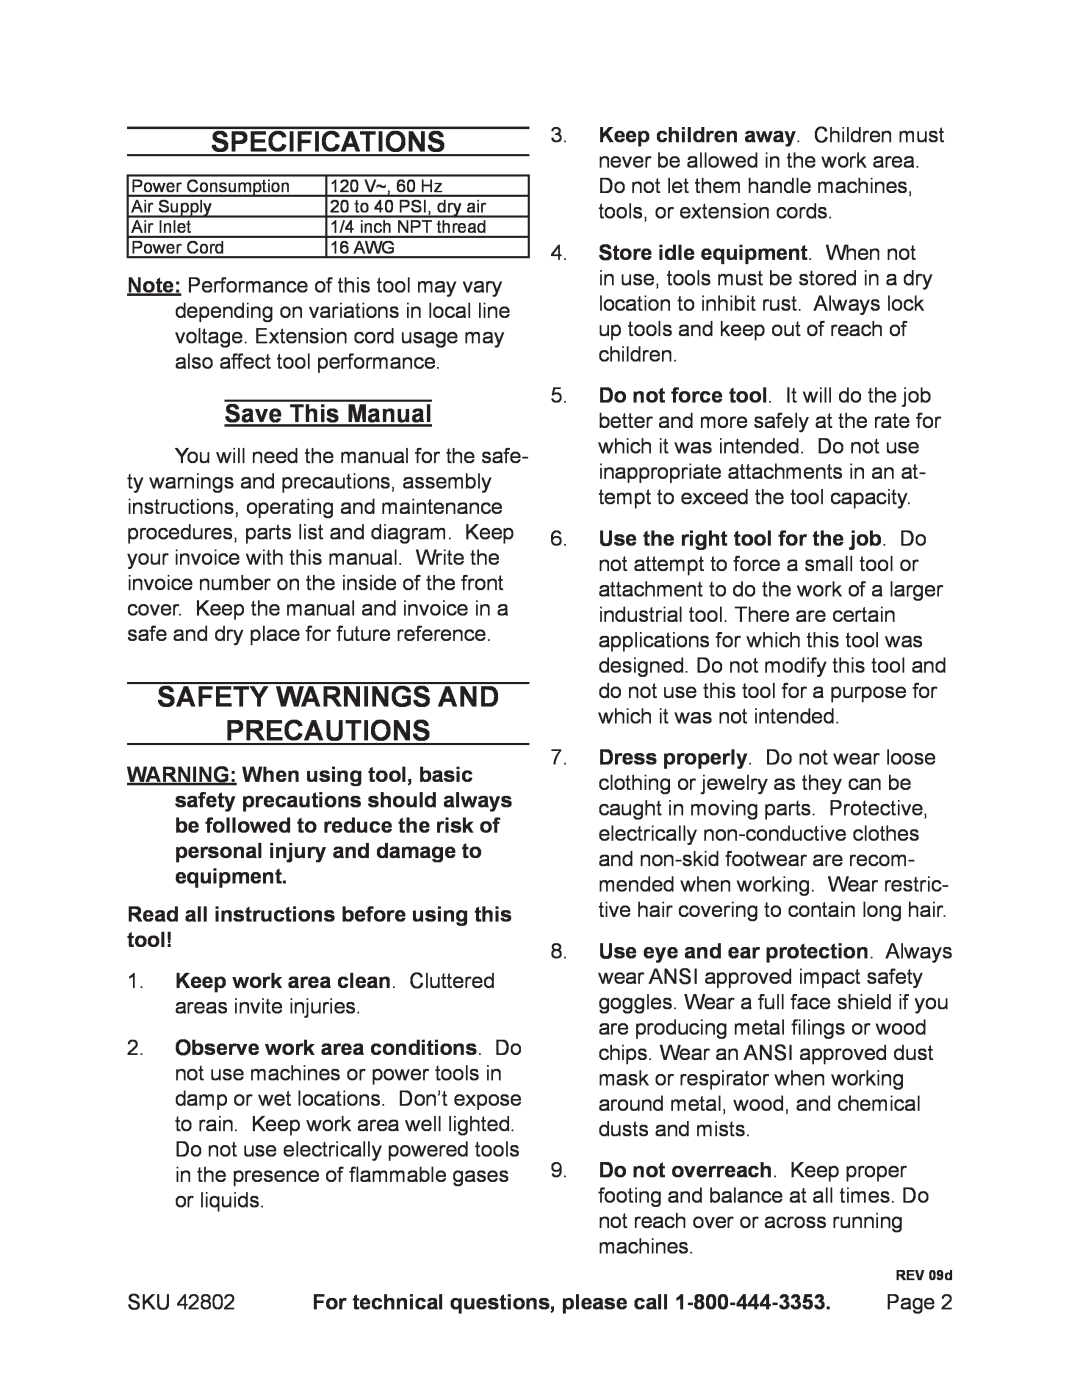 Chicago Electric 42802 operating instructions Specifications, Safety Warnings and Precautions, Save This Manual 